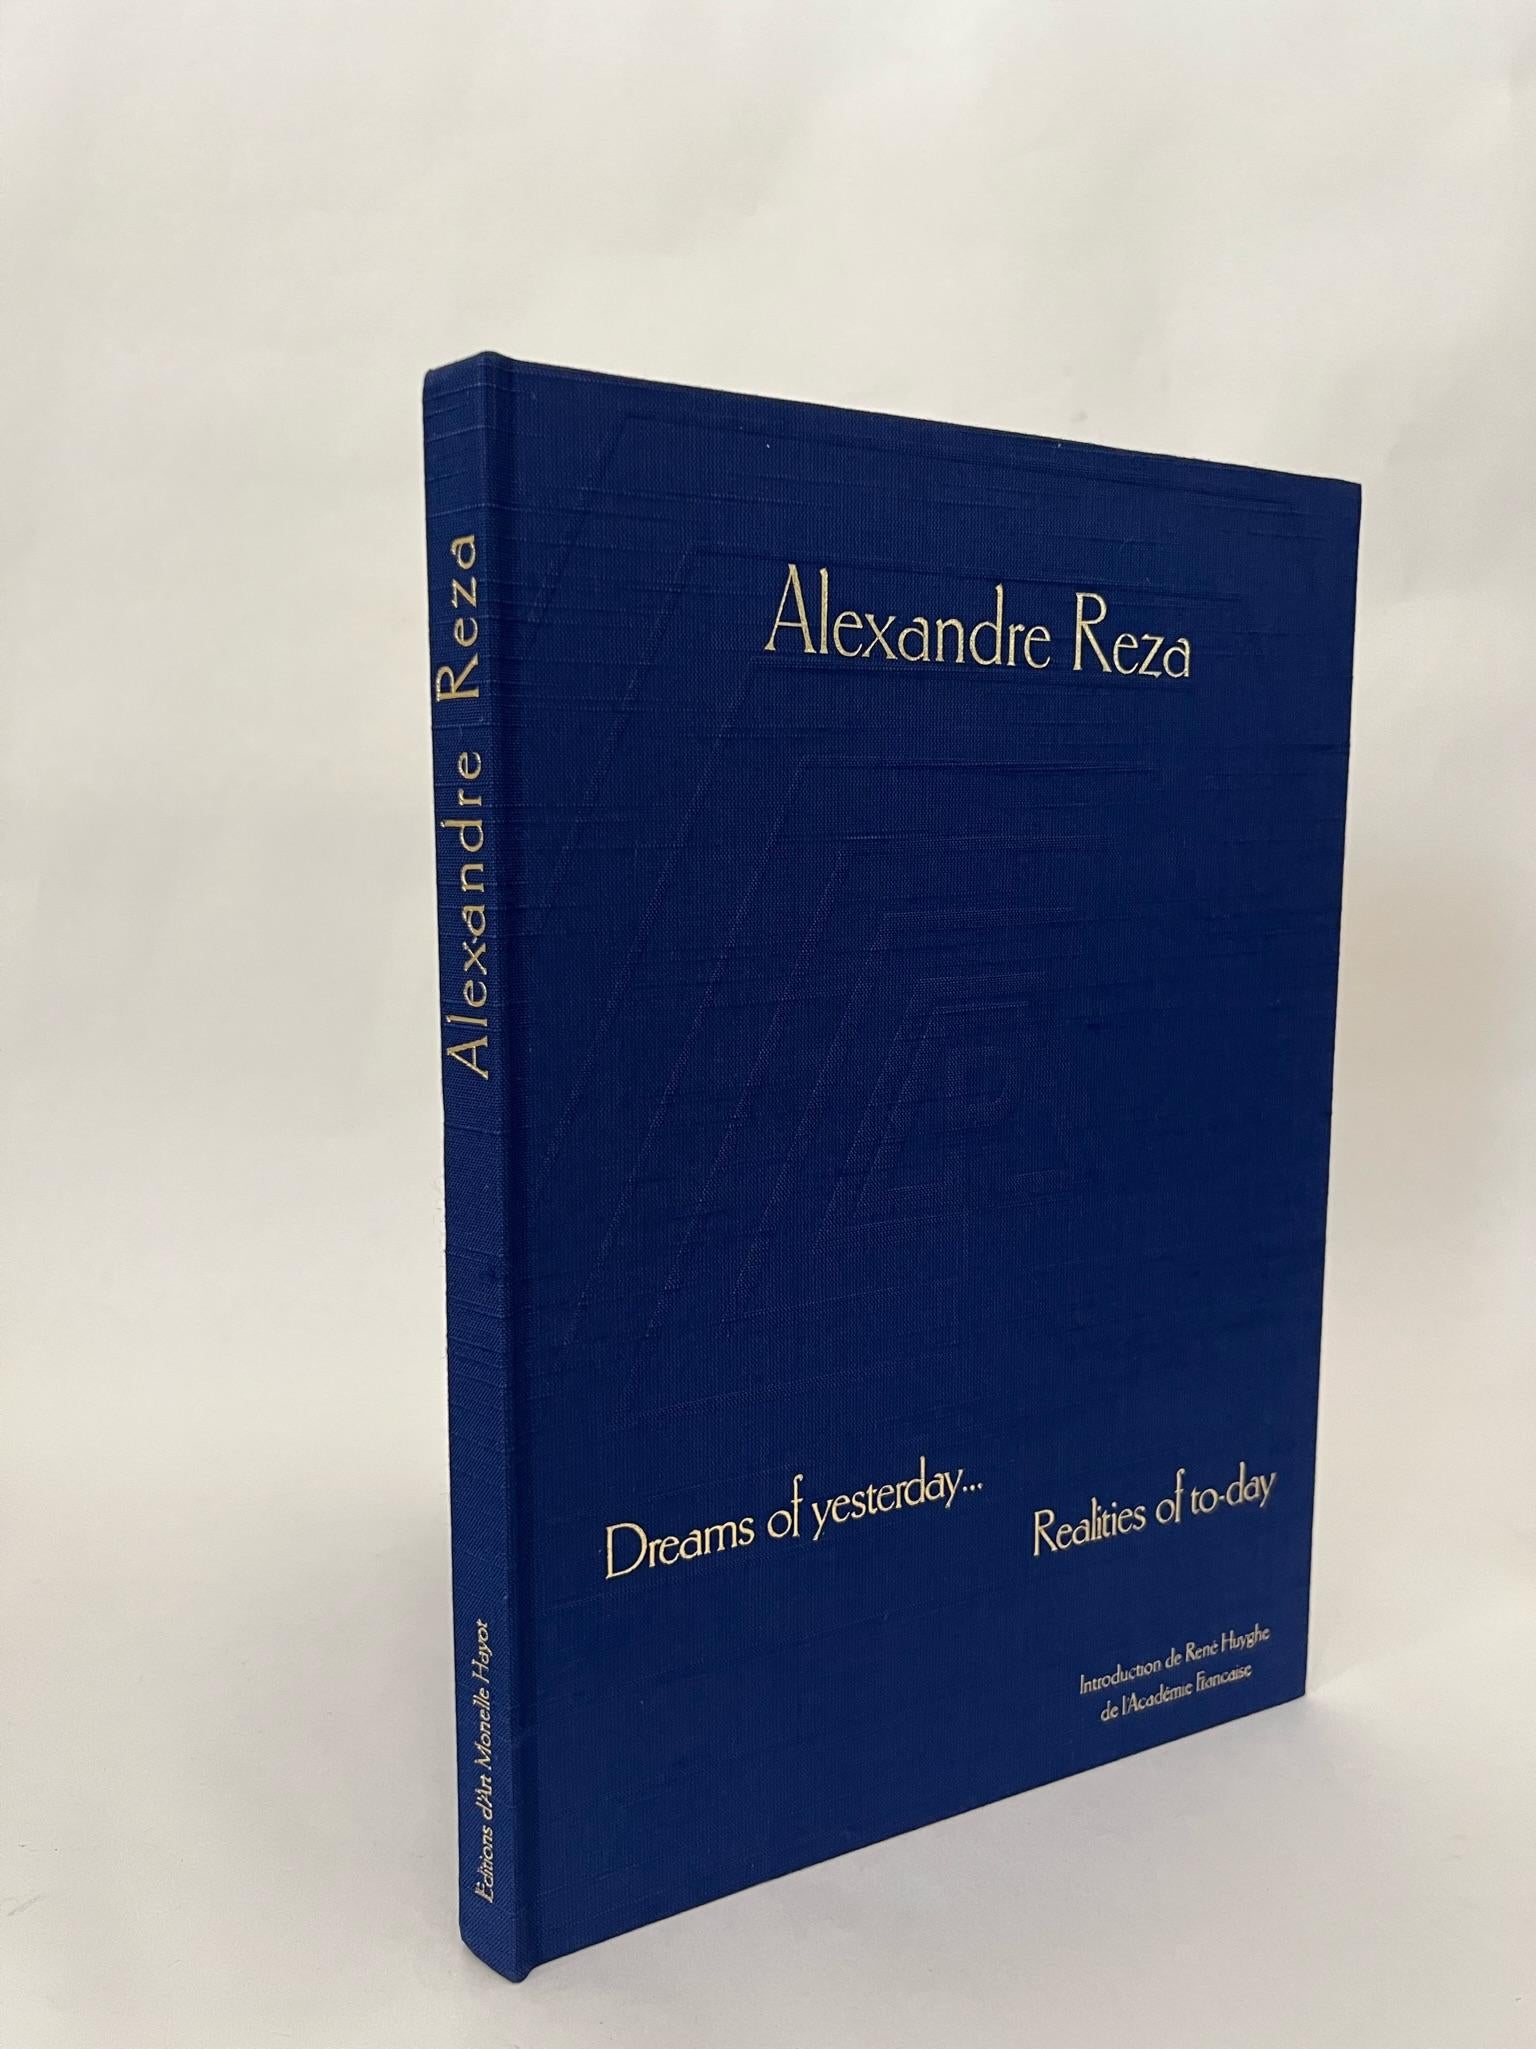 Alexandre Reza Dreams of Yesterday Realities of To-Day Book by Arlette Seta 1985 For Sale 7